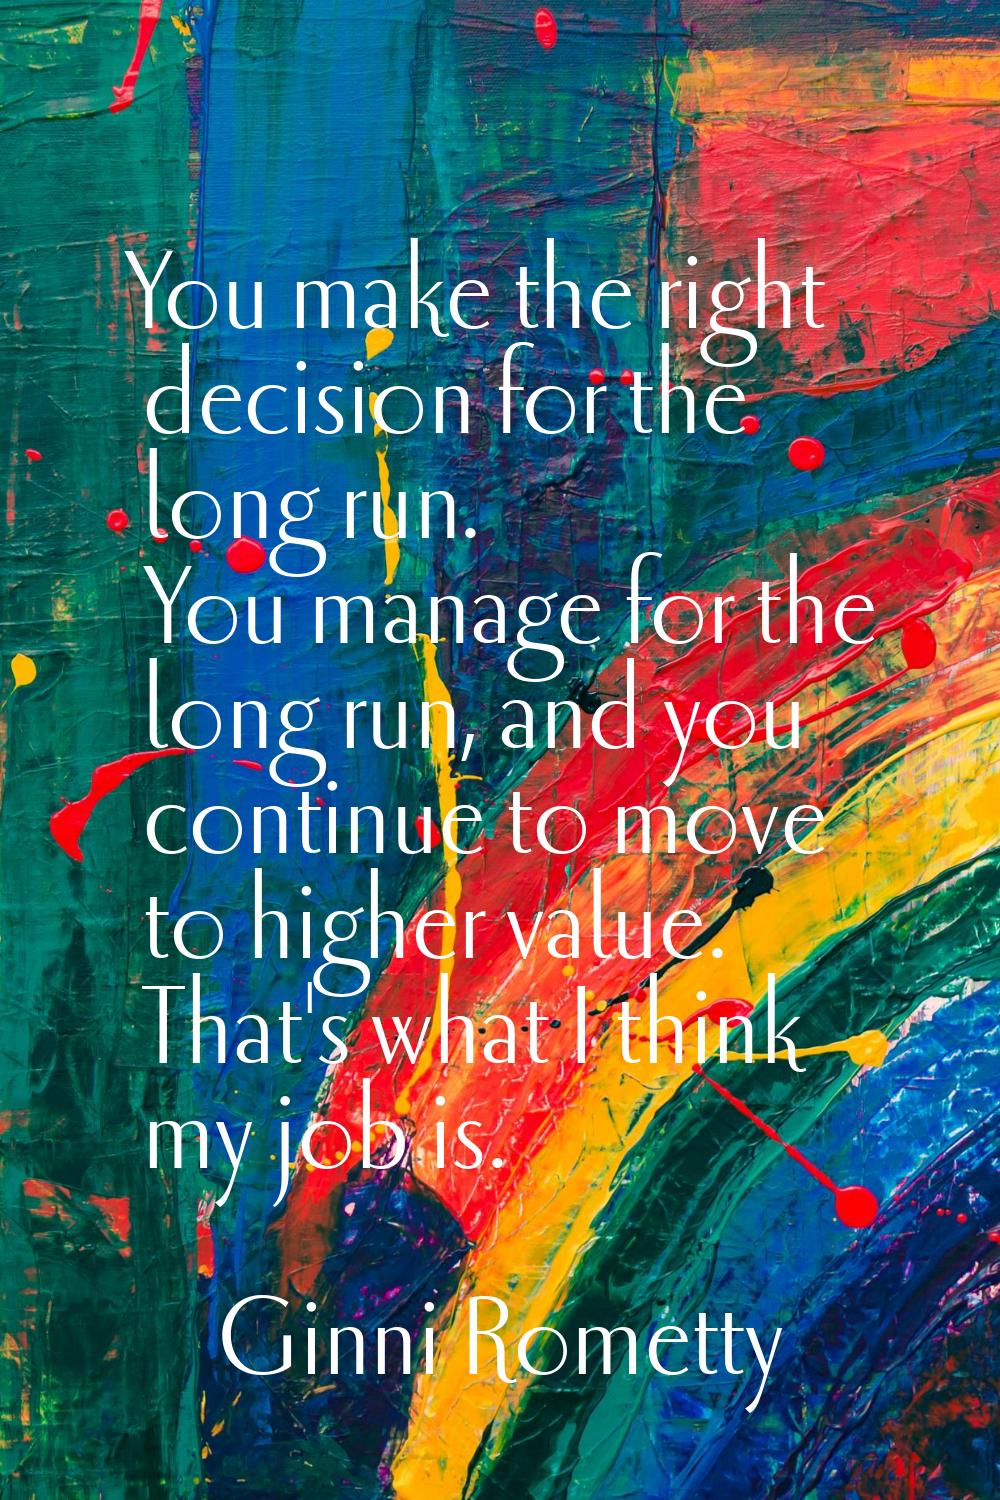 You make the right decision for the long run. You manage for the long run, and you continue to move